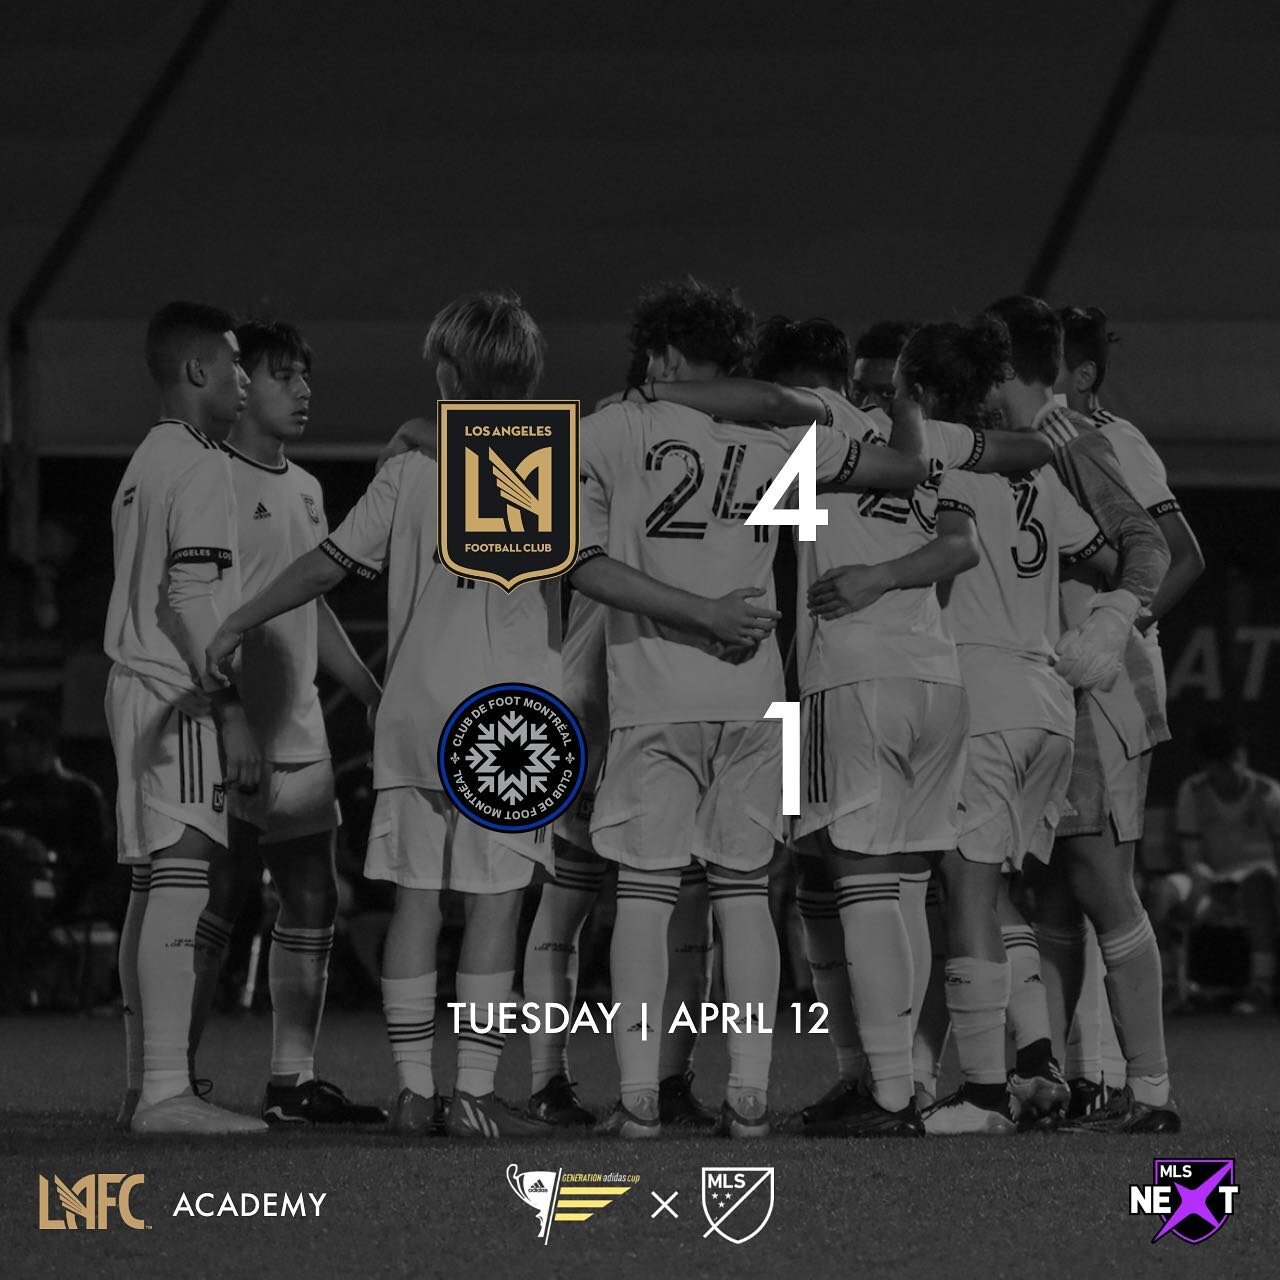 Big win yesterday vs CF Montr&eacute;al to move on to the quarterfinals. Next up: Toronto FC | Tomorrow (4/14) at 12pm CST. @lafcacademy @mlsnext #U15 #generationadidascup2022